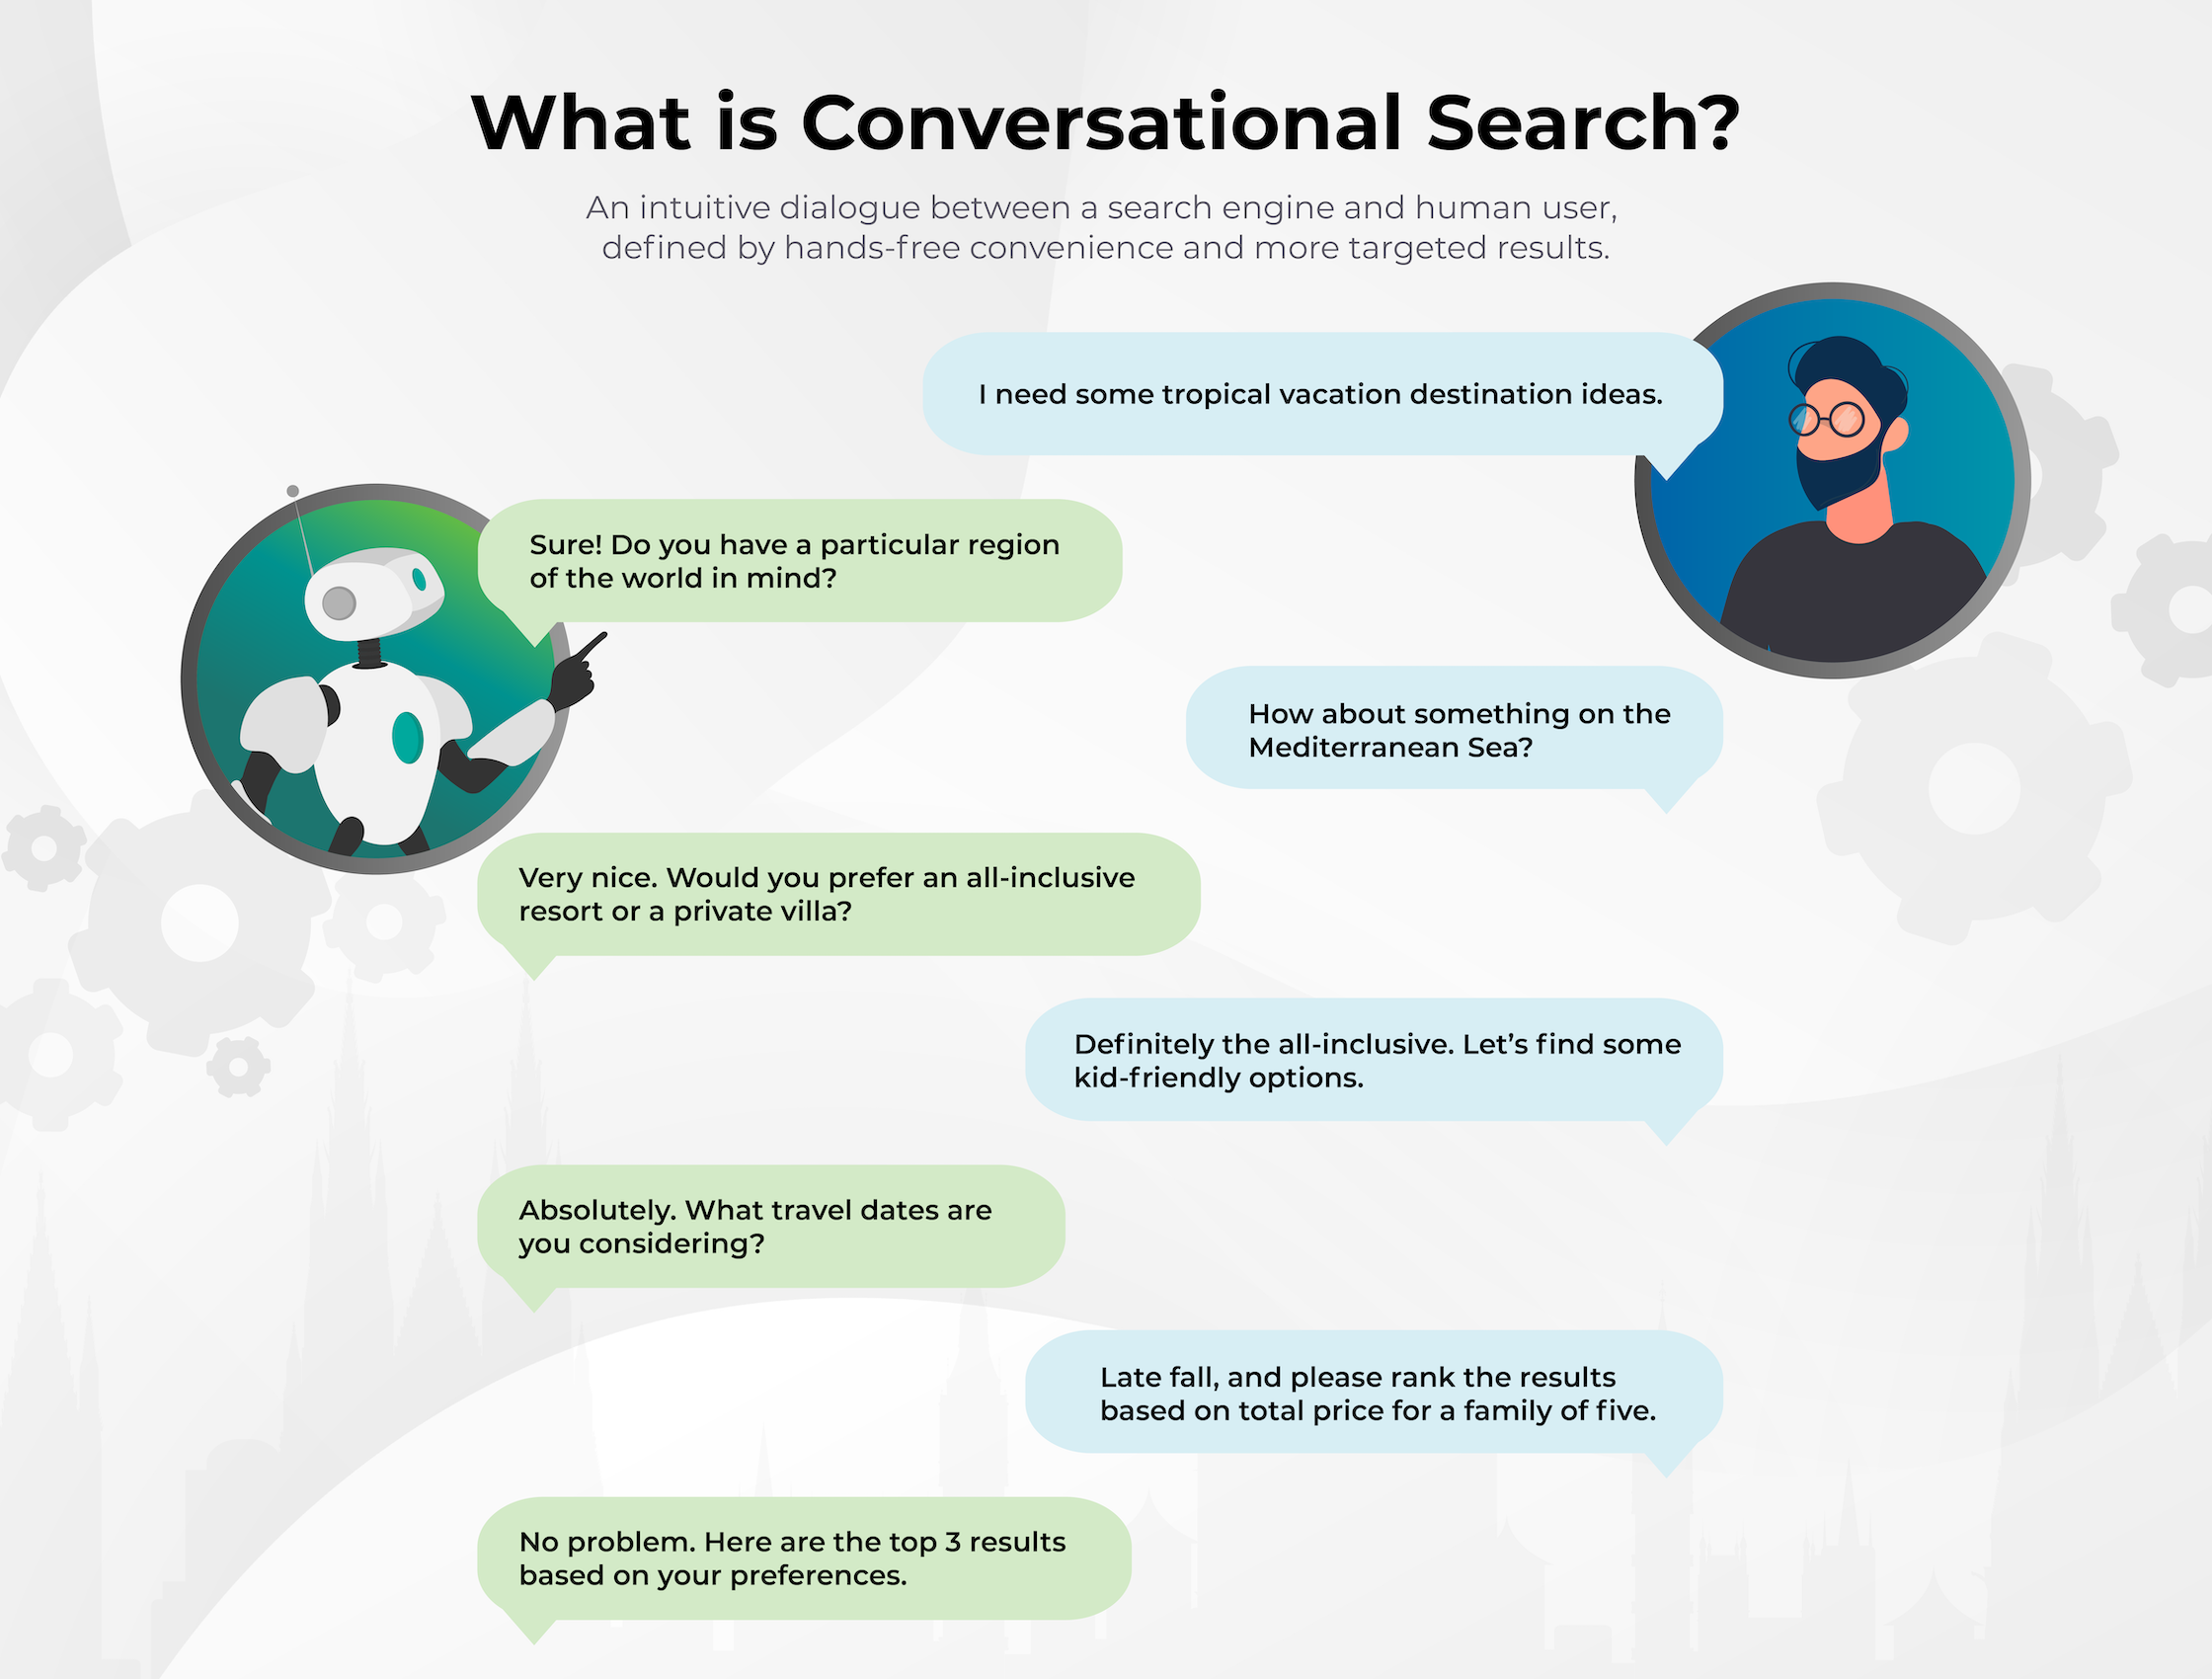 What is Conversational Search?